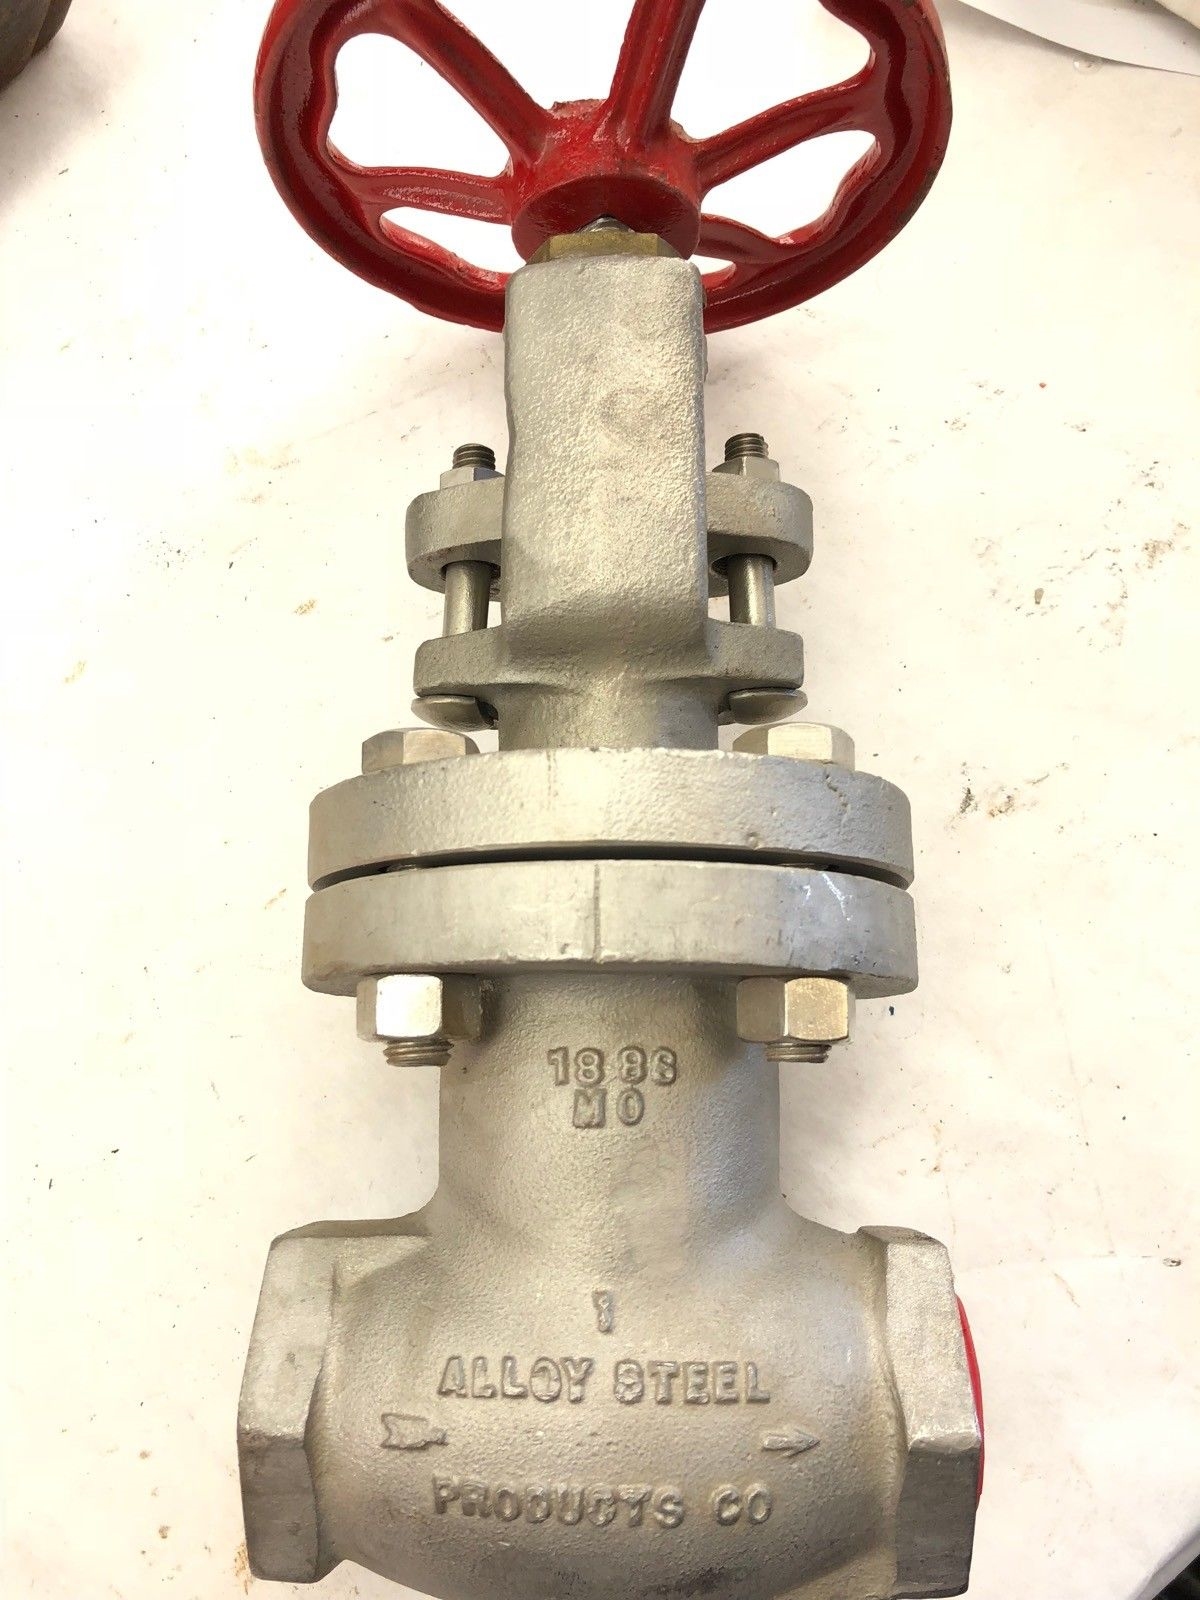 NEW ALLOY STEEL PRODUCTS 1″, 188S GATE VALVE, 2108, FAST SHIP! 1